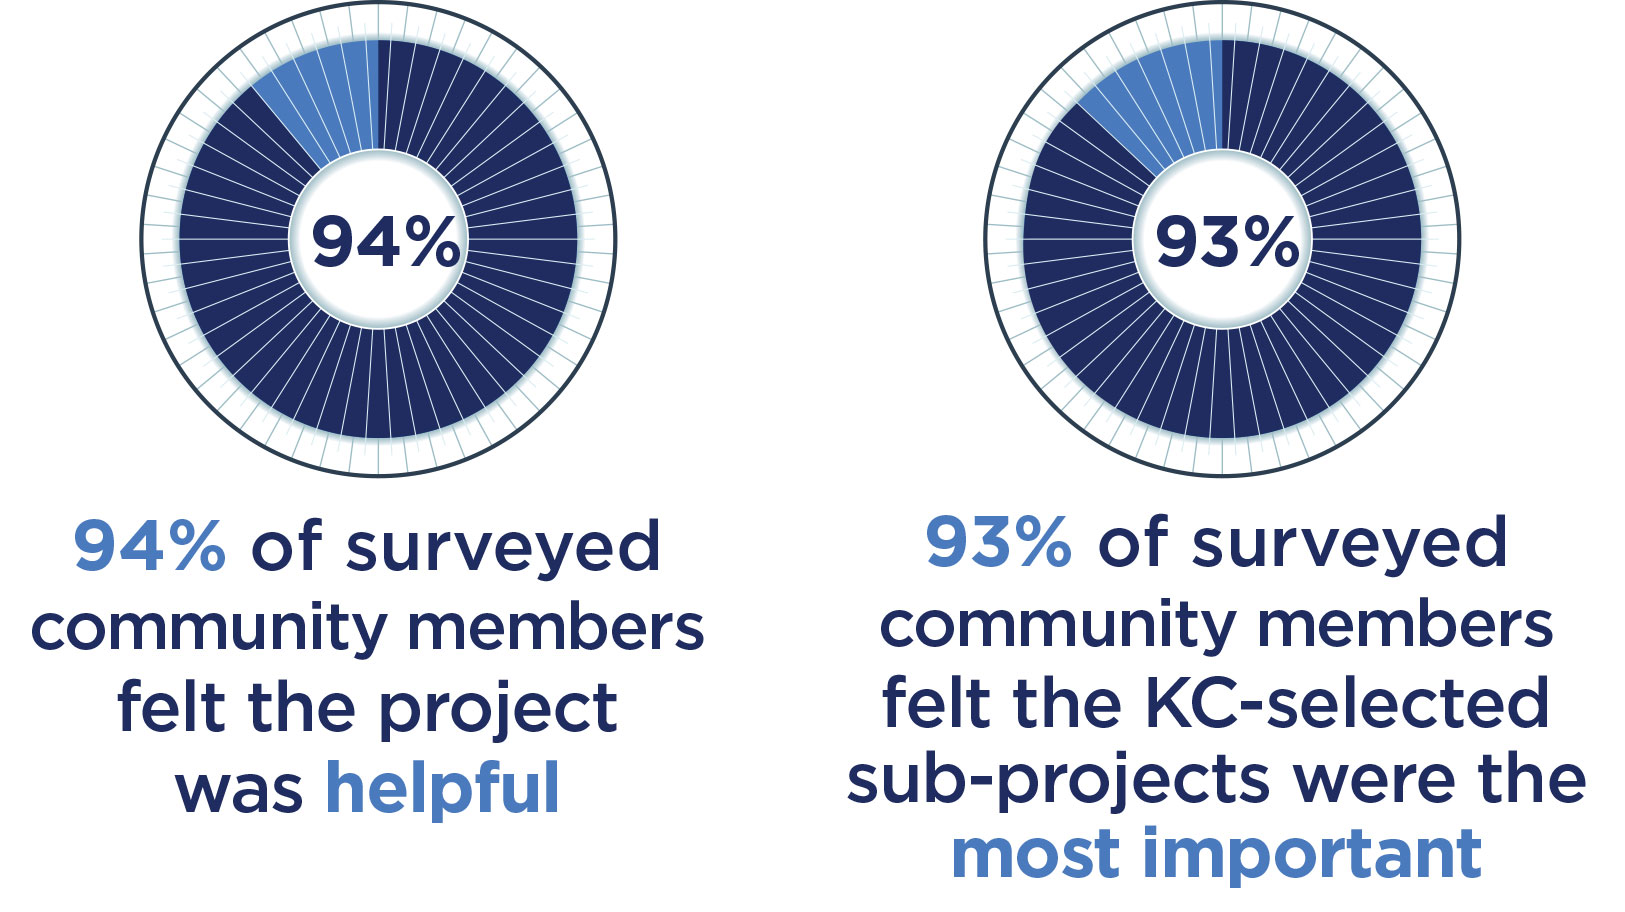 94 percent of the control group identified the project as helpful.